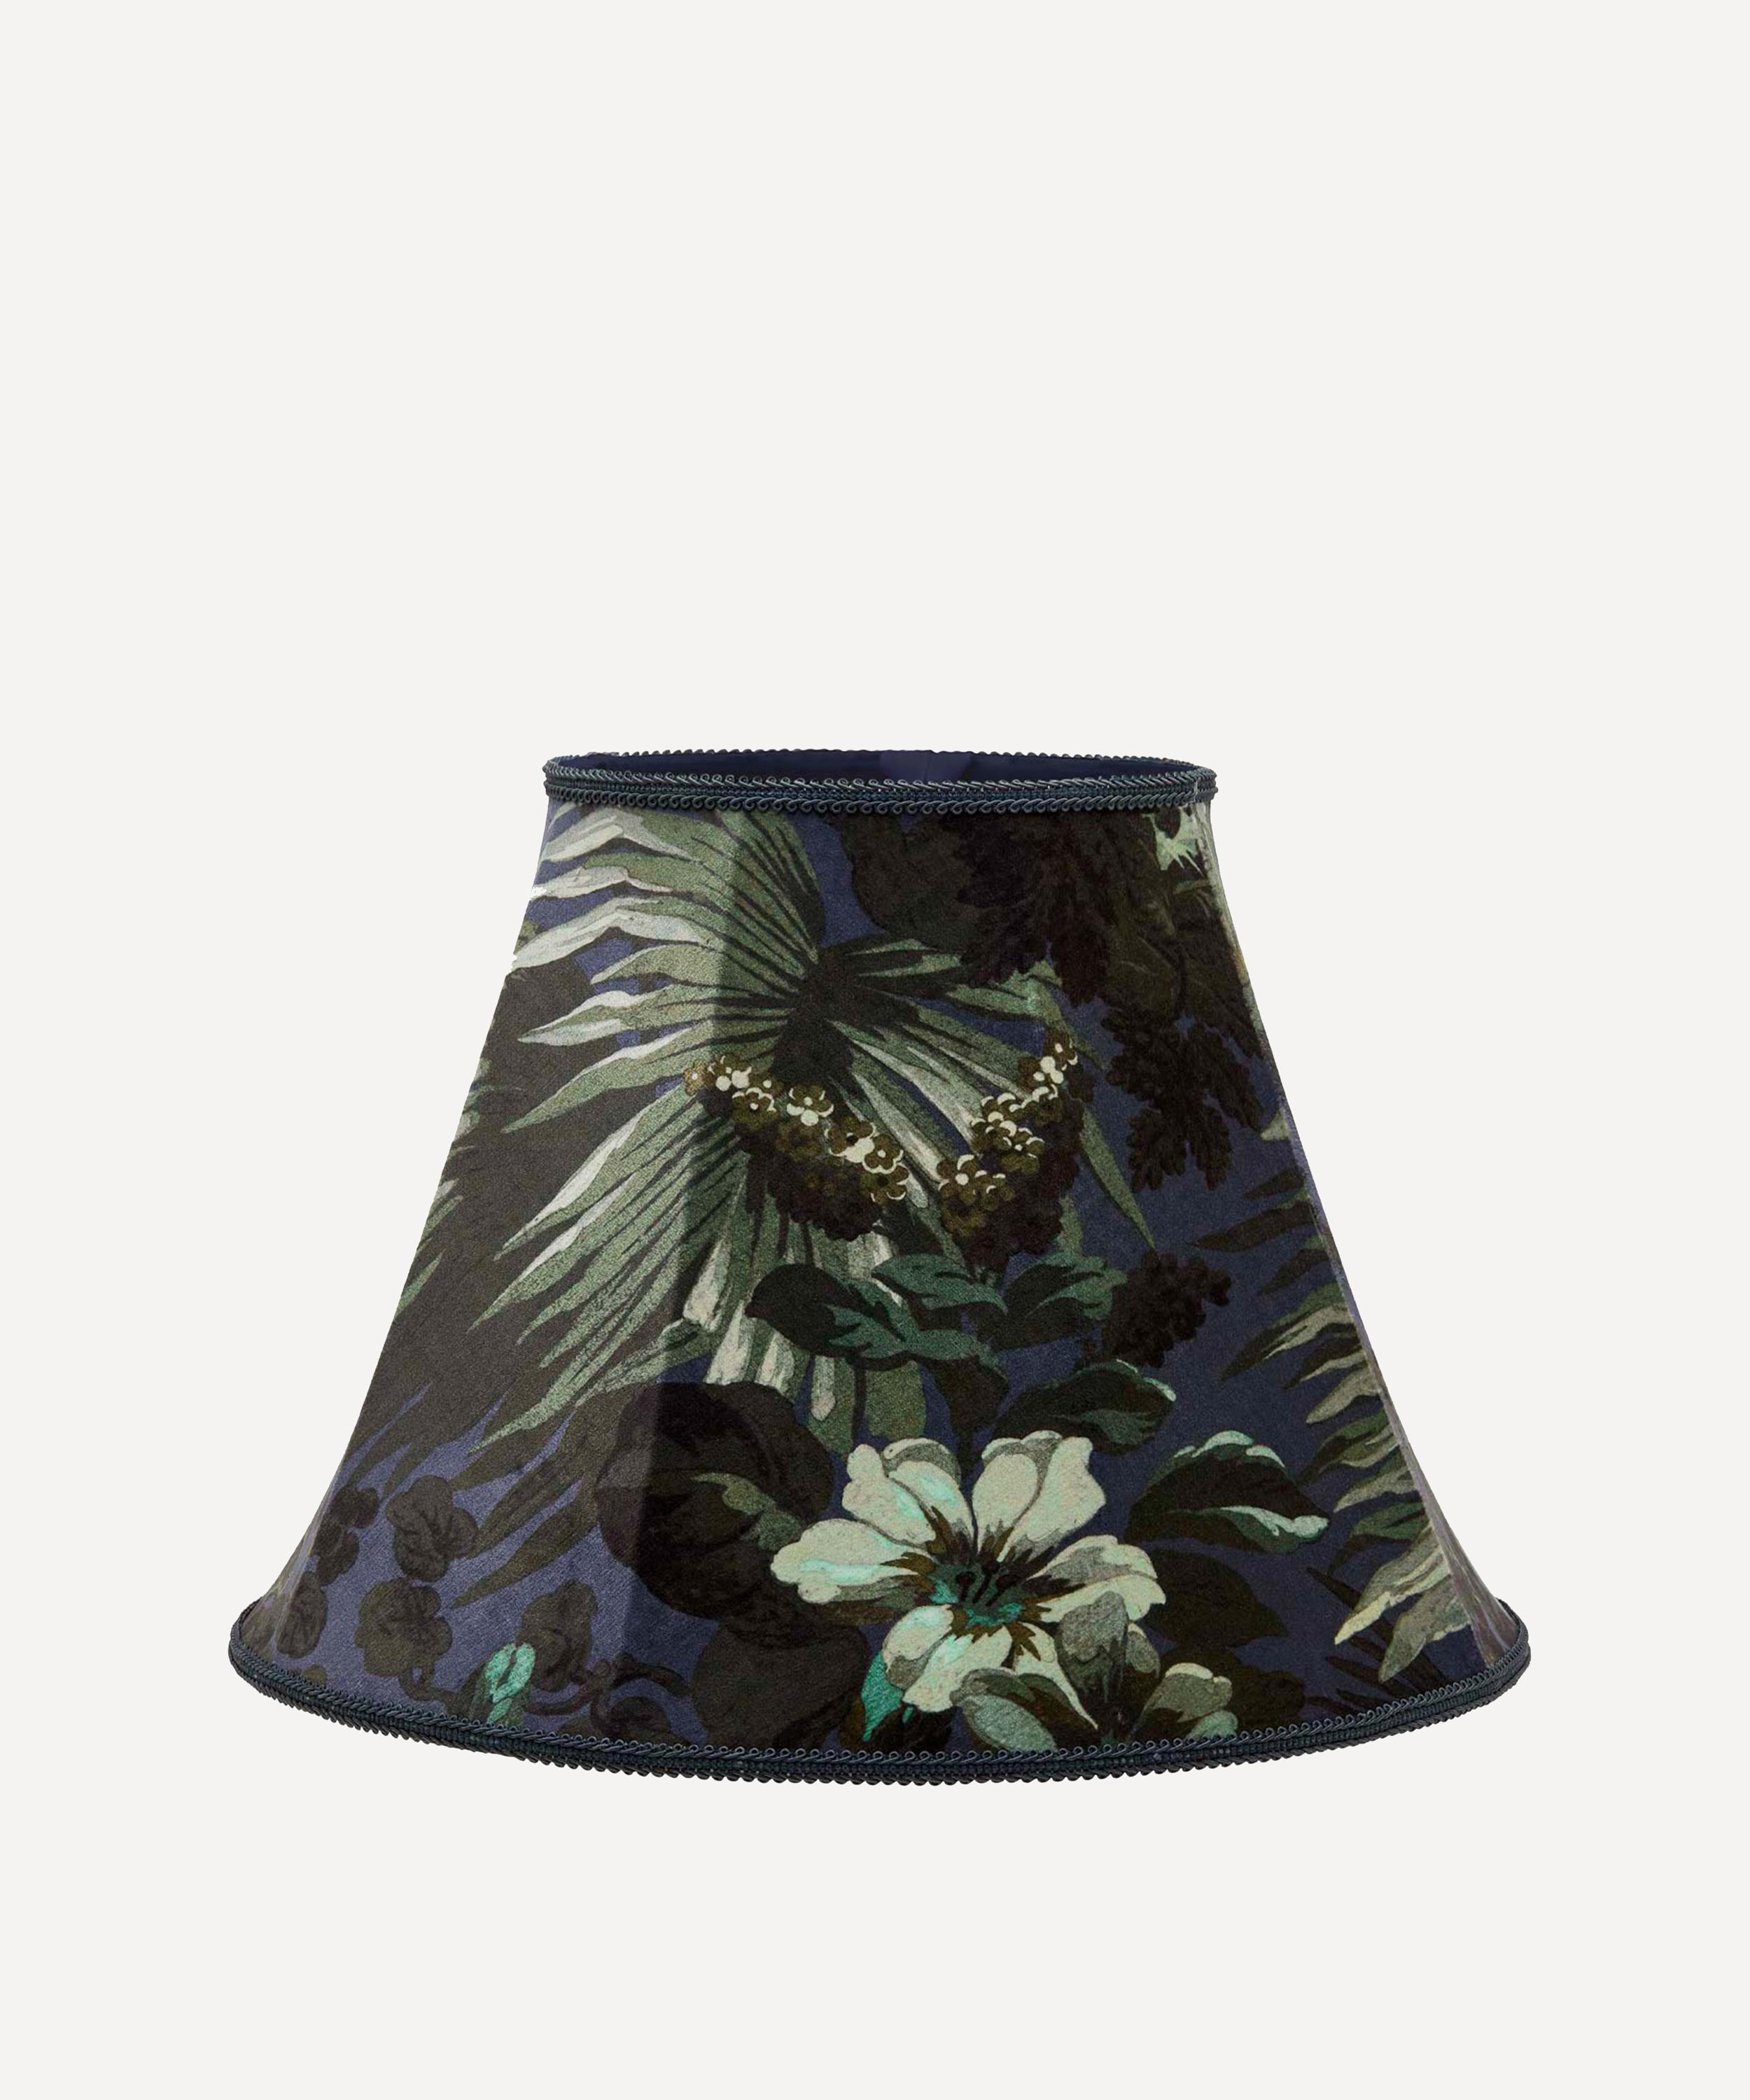 HOUSE OF HACKNEY LIMERENCE MARLOW VELVET LAMPSHADE,000629786